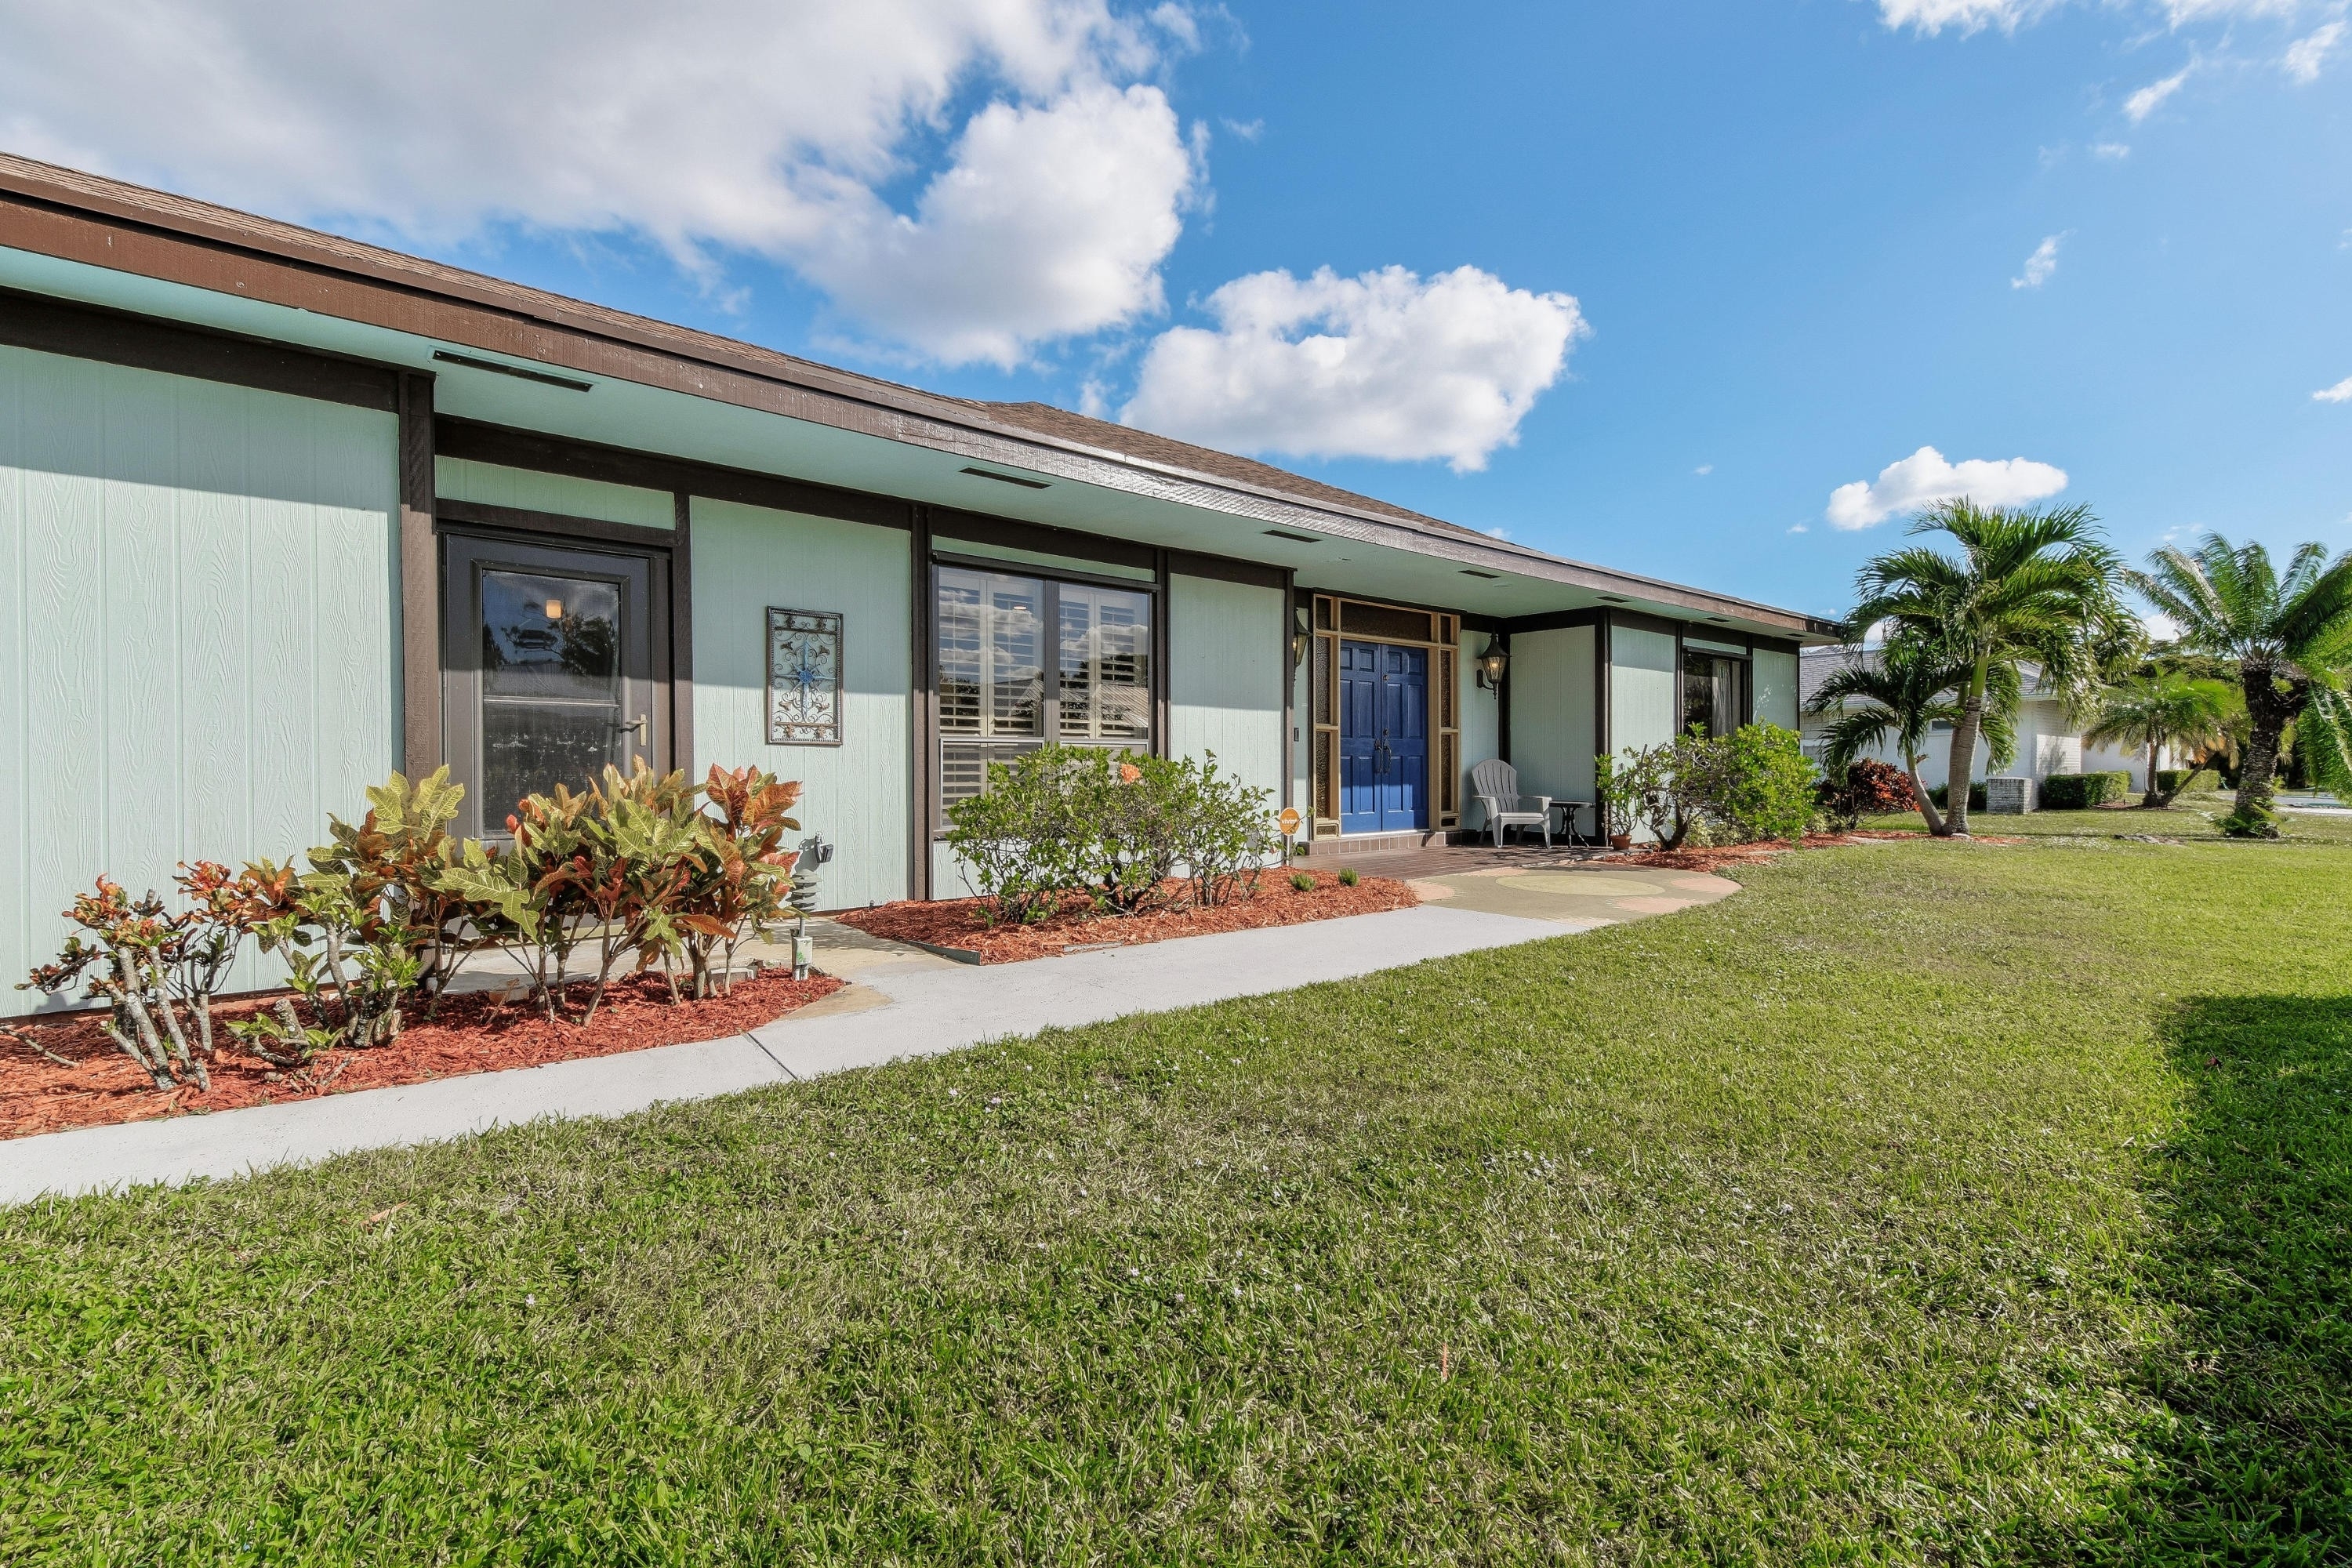 Single Family Home at Tequesta